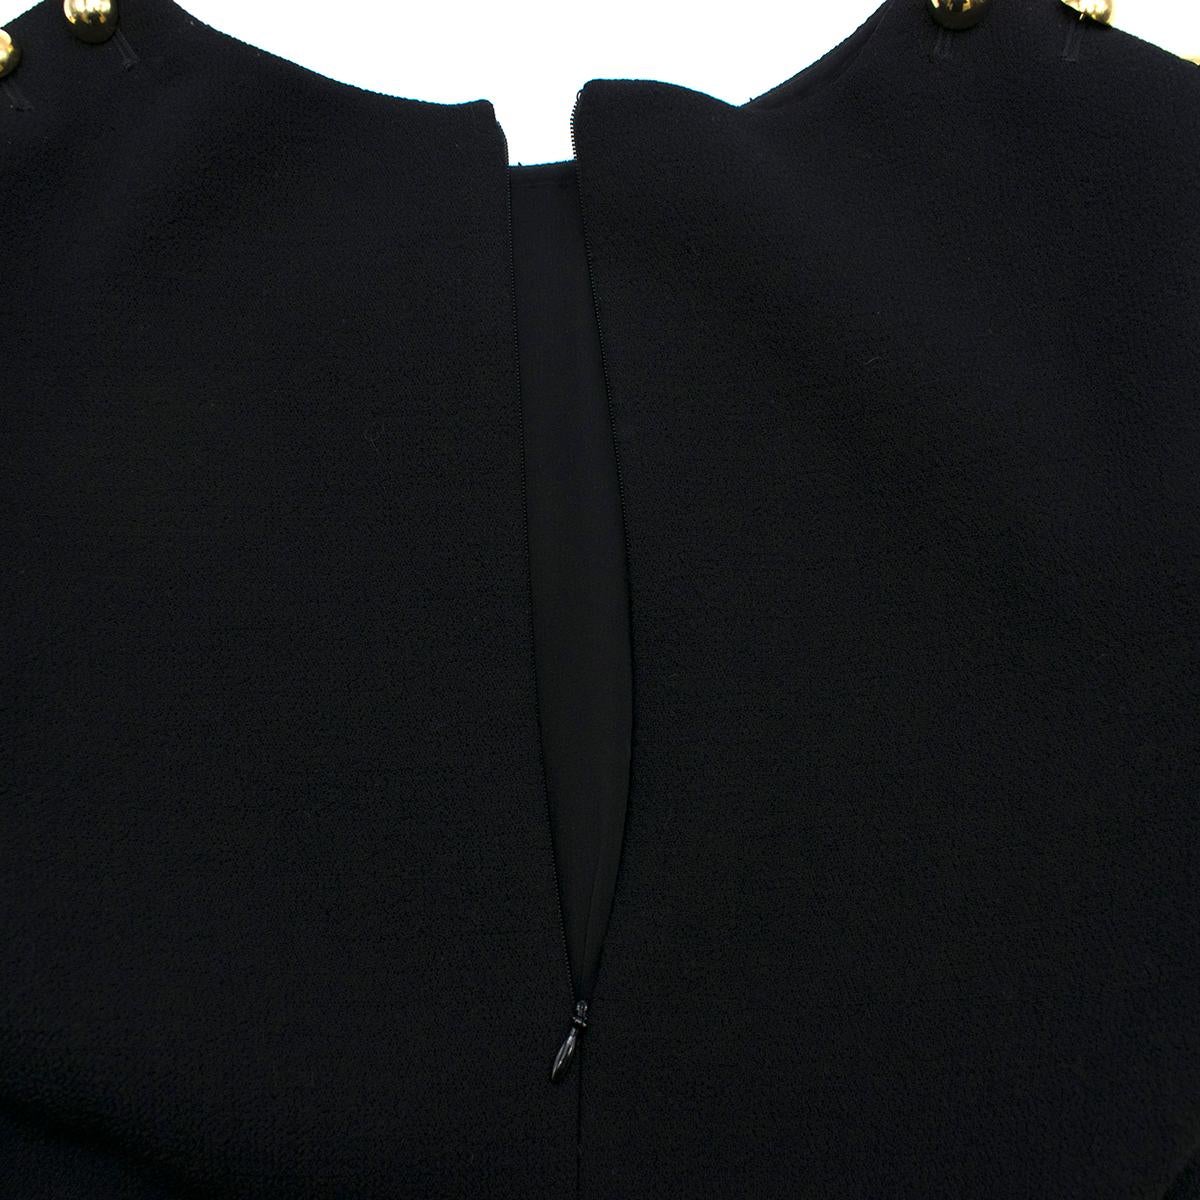 3.1 Phillip Lim Black Studded Sleeve Dress US 8 In Good Condition For Sale In London, GB